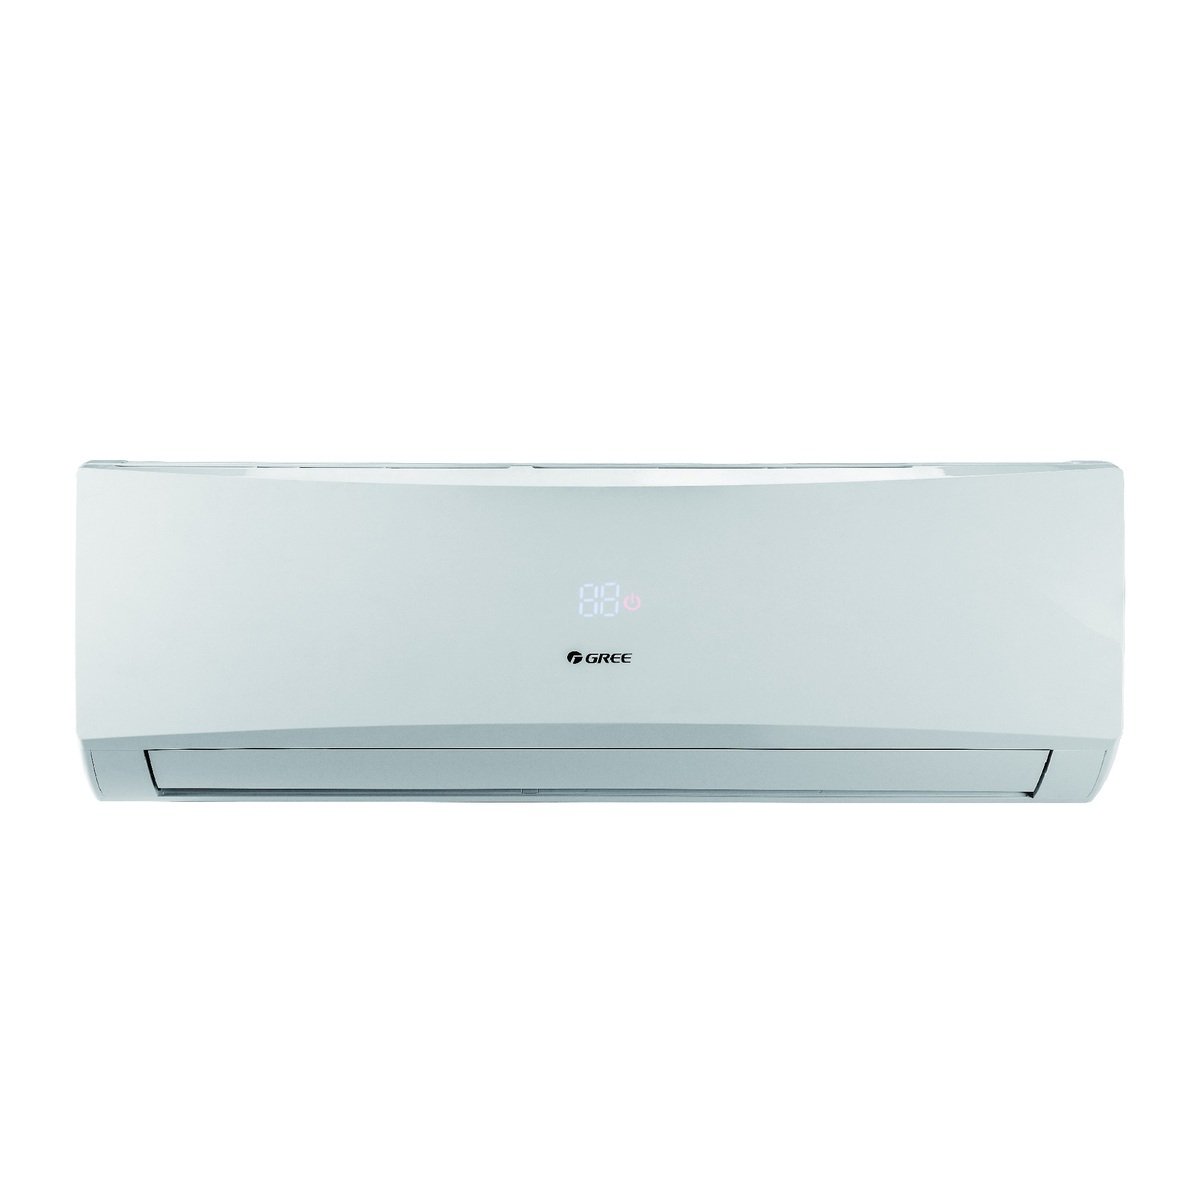 Gree Split Air Conditioner B4 matic-R18C3 1.5 Ton With Rotary Compressor